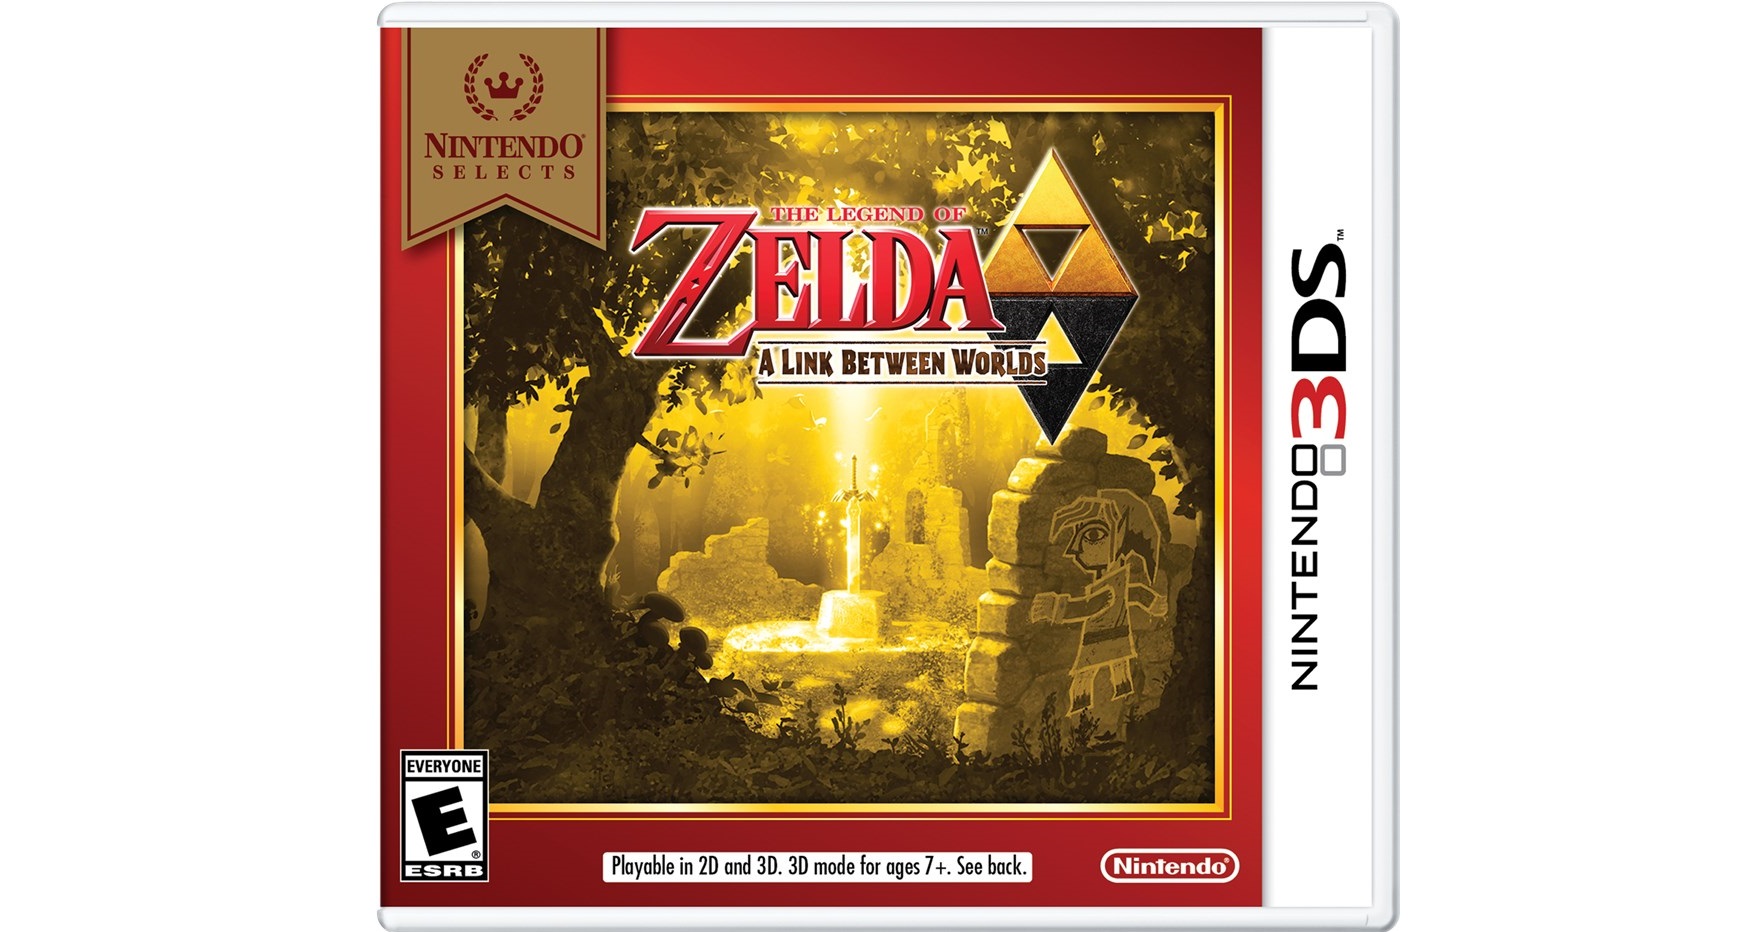 Eight Wii U and Nintendo 3DS games join Nintendo Selects